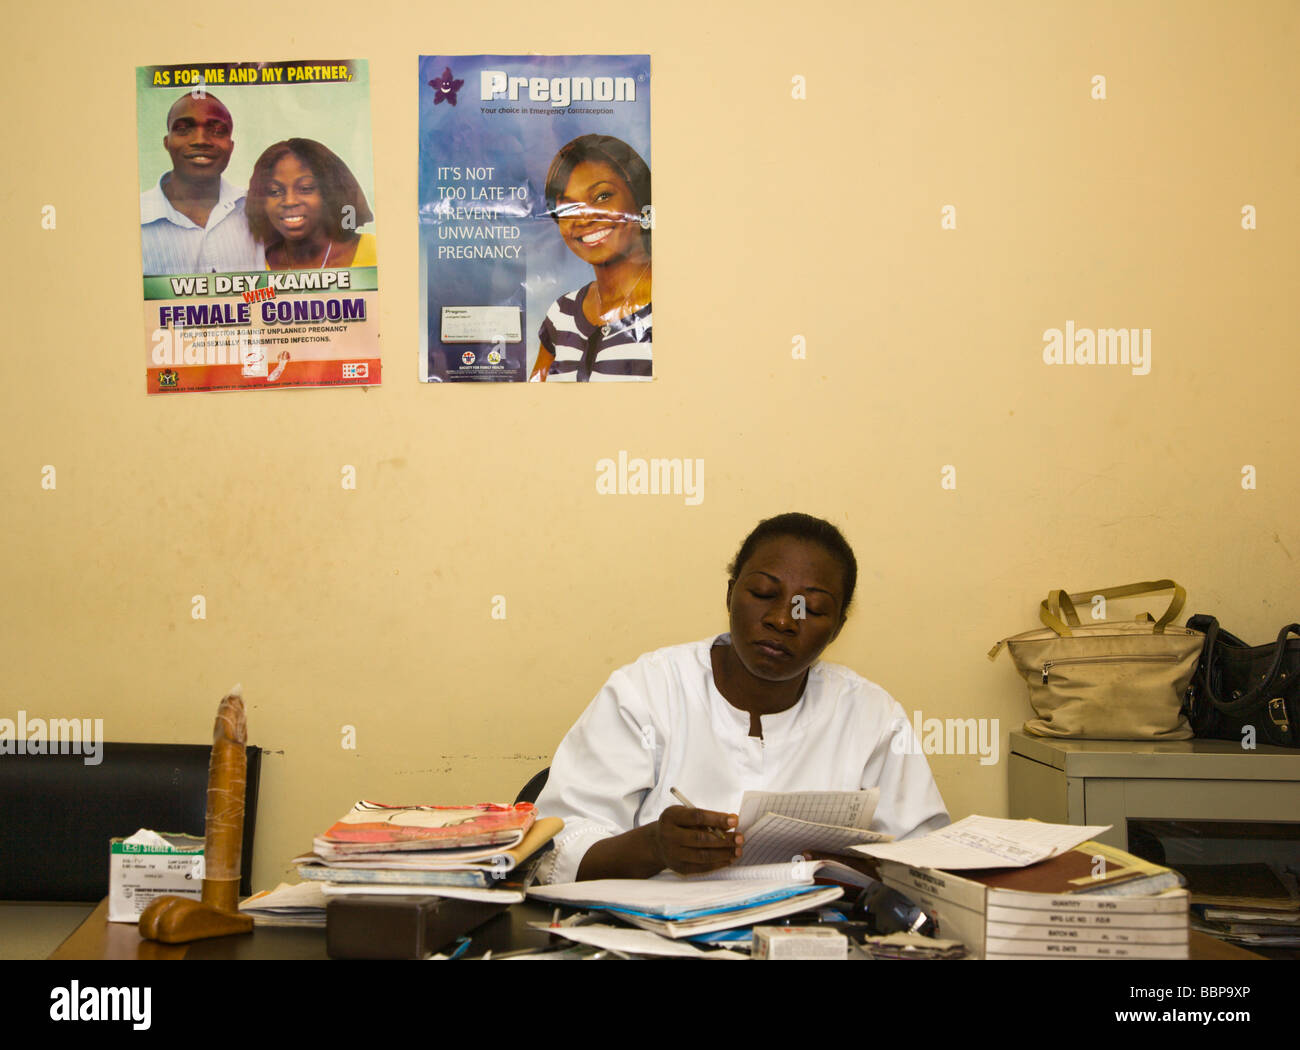 A public family planning clinic in Abuja, Nigeria, displays posters promoting Pregnon emergency contraceptives & female condoms. Stock Photo